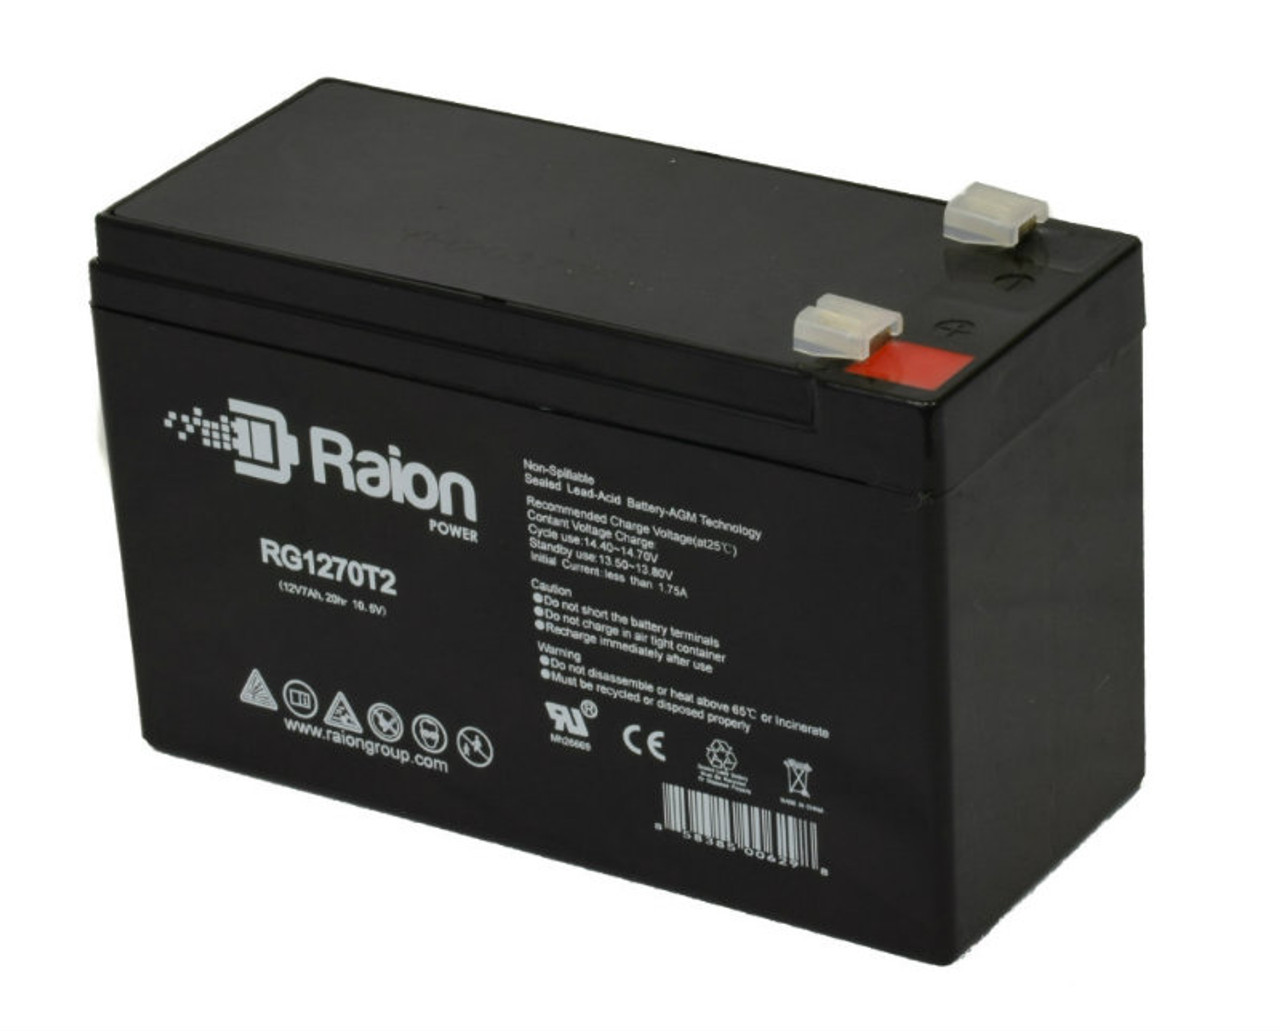 Raion Power Replacement 12V 7Ah RG1270T1 Fire Alarm Battery for Altronix SMP7PMP4